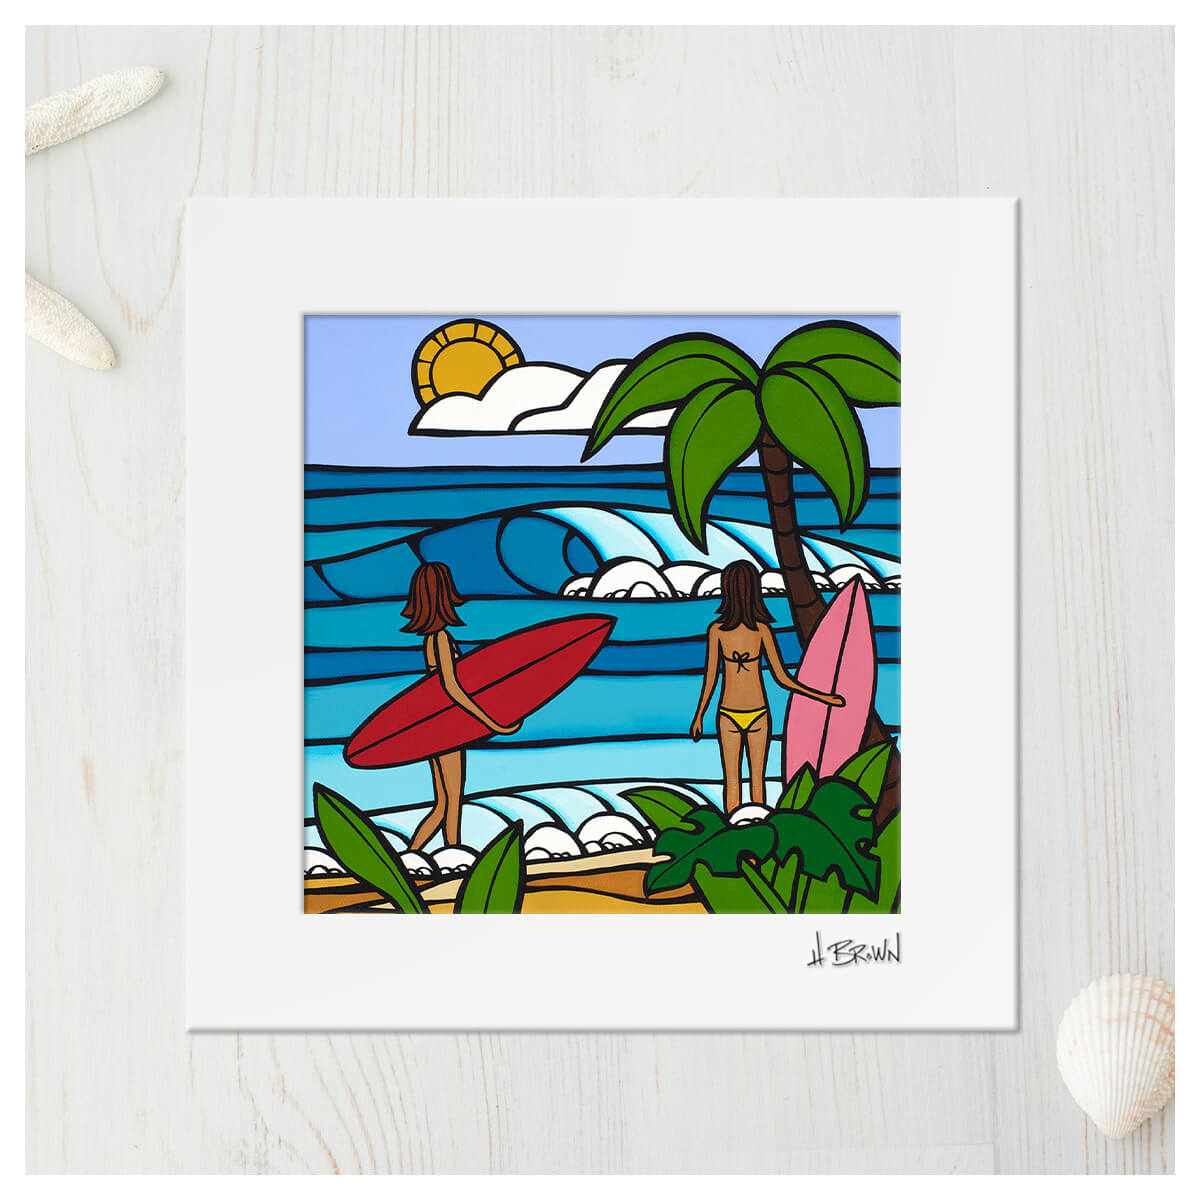 Matted art print by Hawaii artist Heather Brown featuring two female Hawaii surfers with red and pink surfboards checking out waves on the beach 